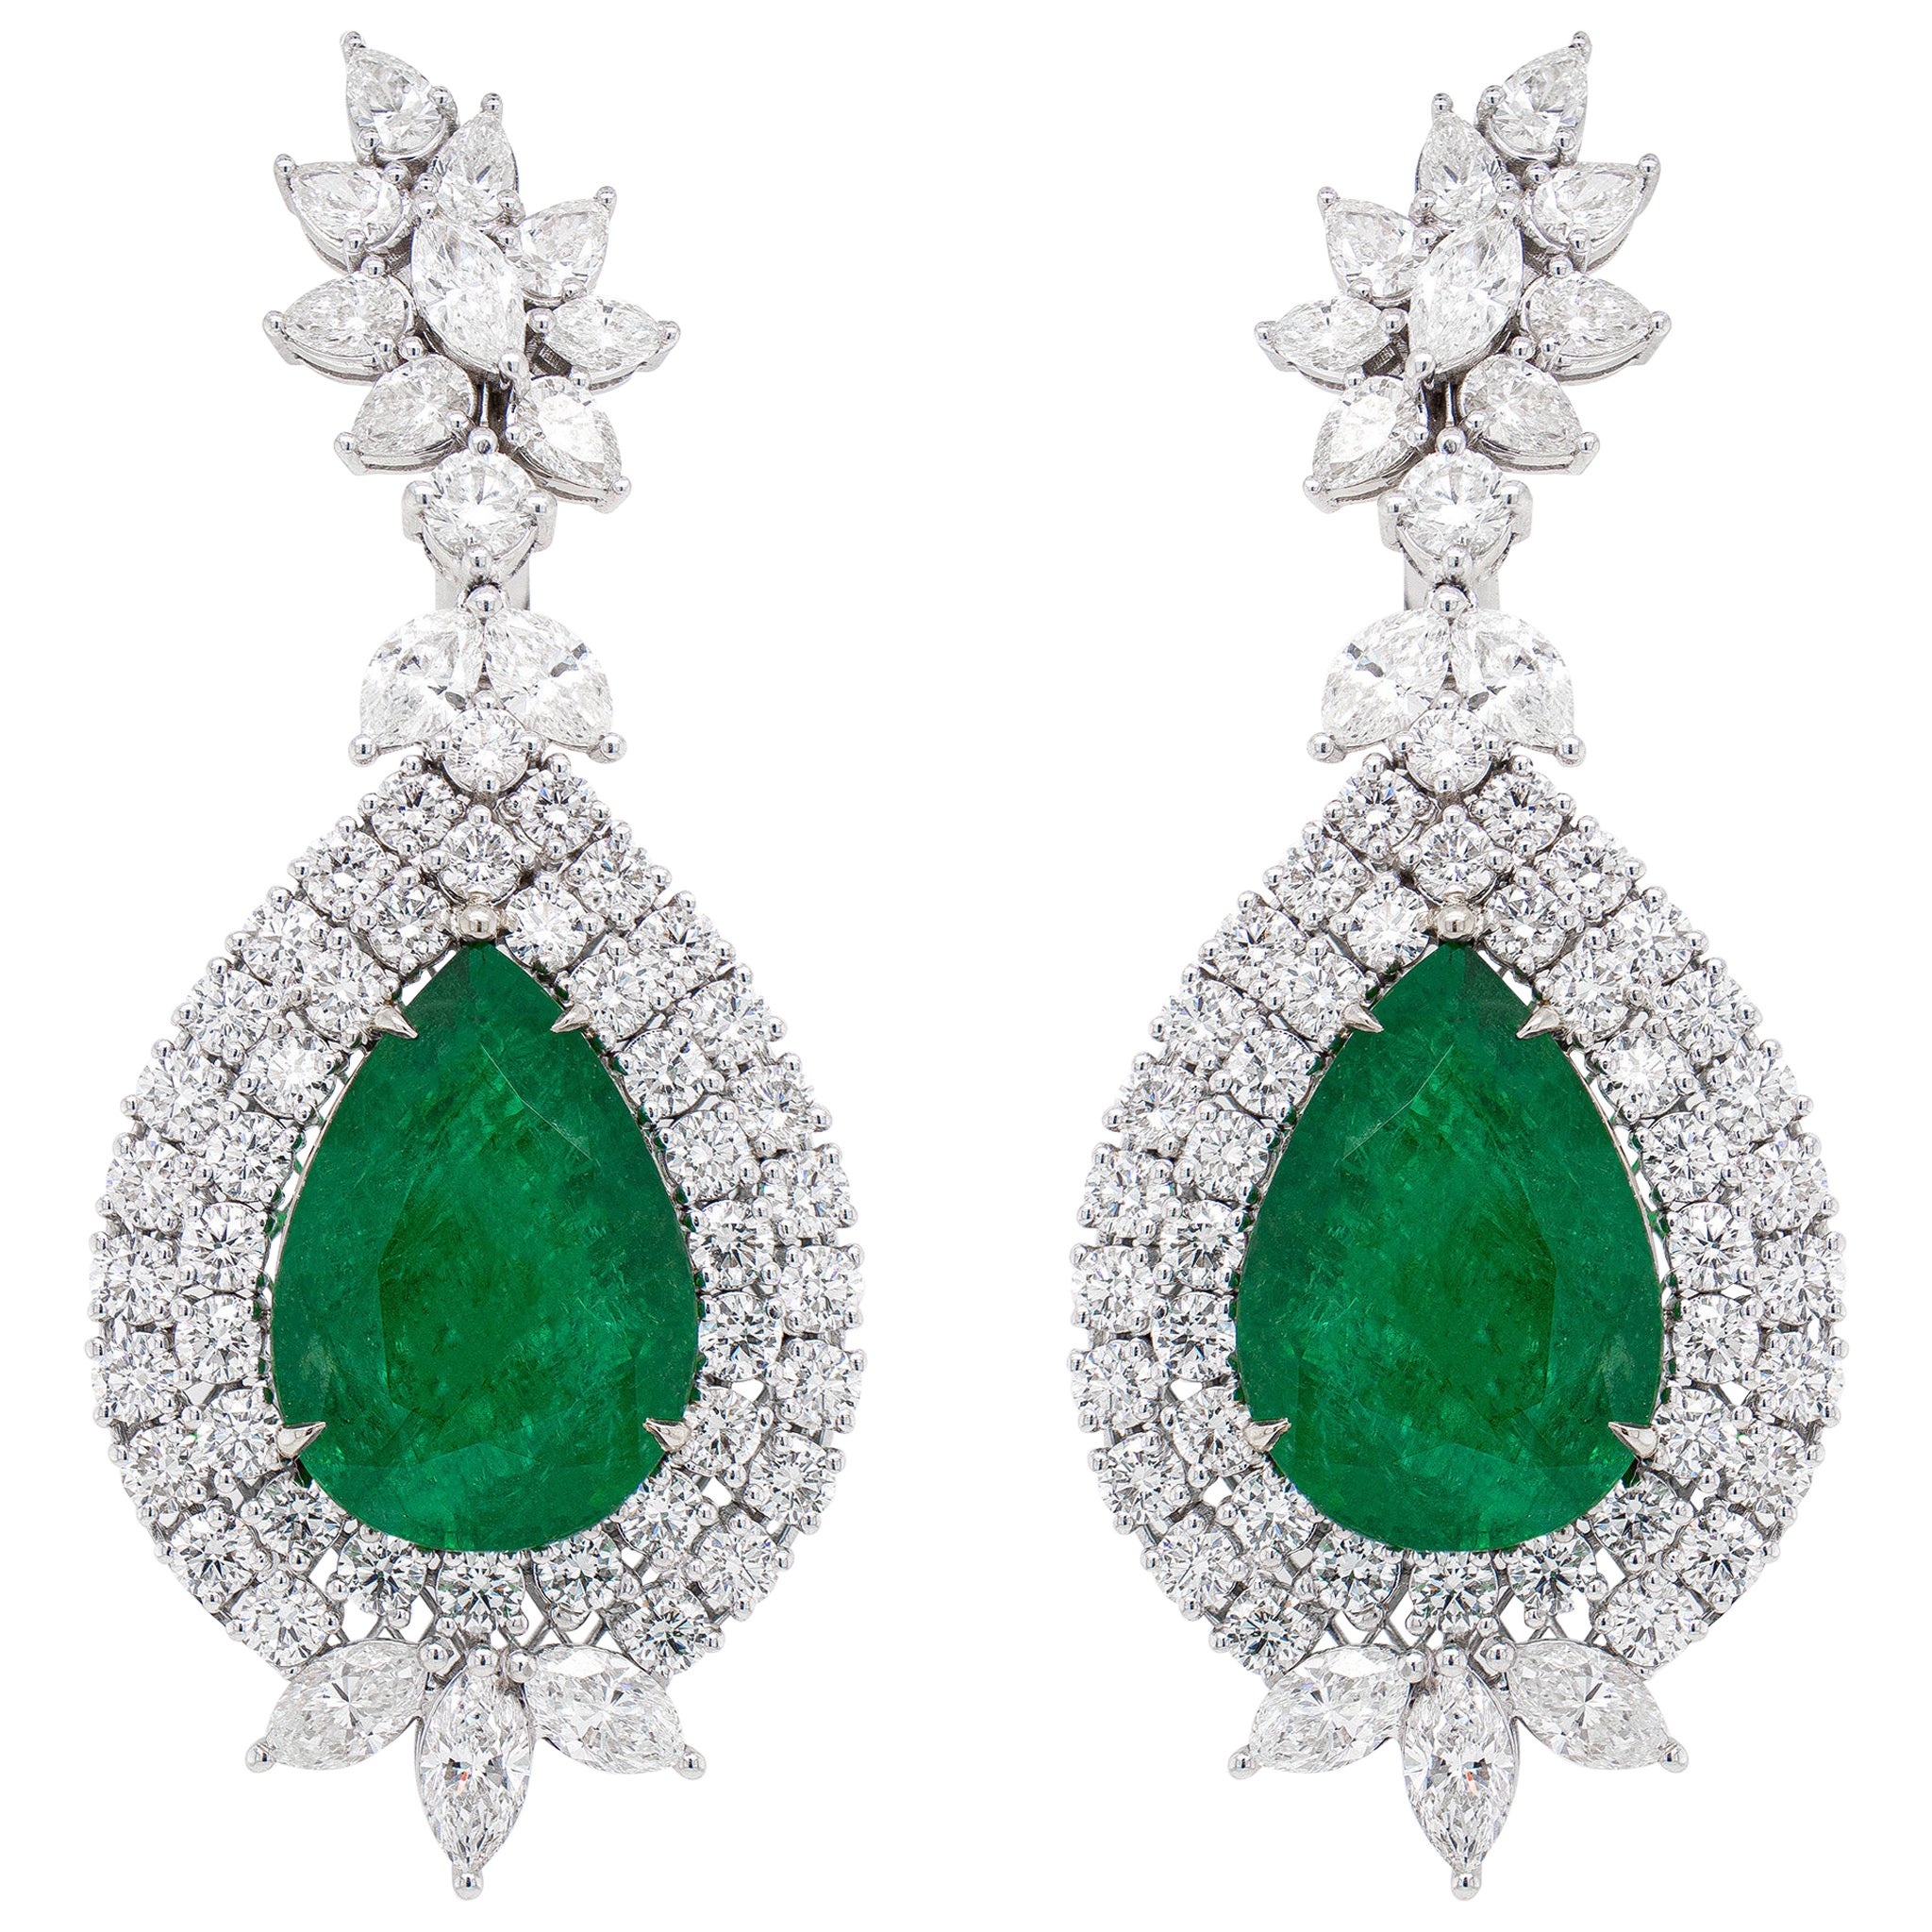 Important 21.86 Carat Pear Emerald Earrings Set with Diamonds 10.52 Carats Total